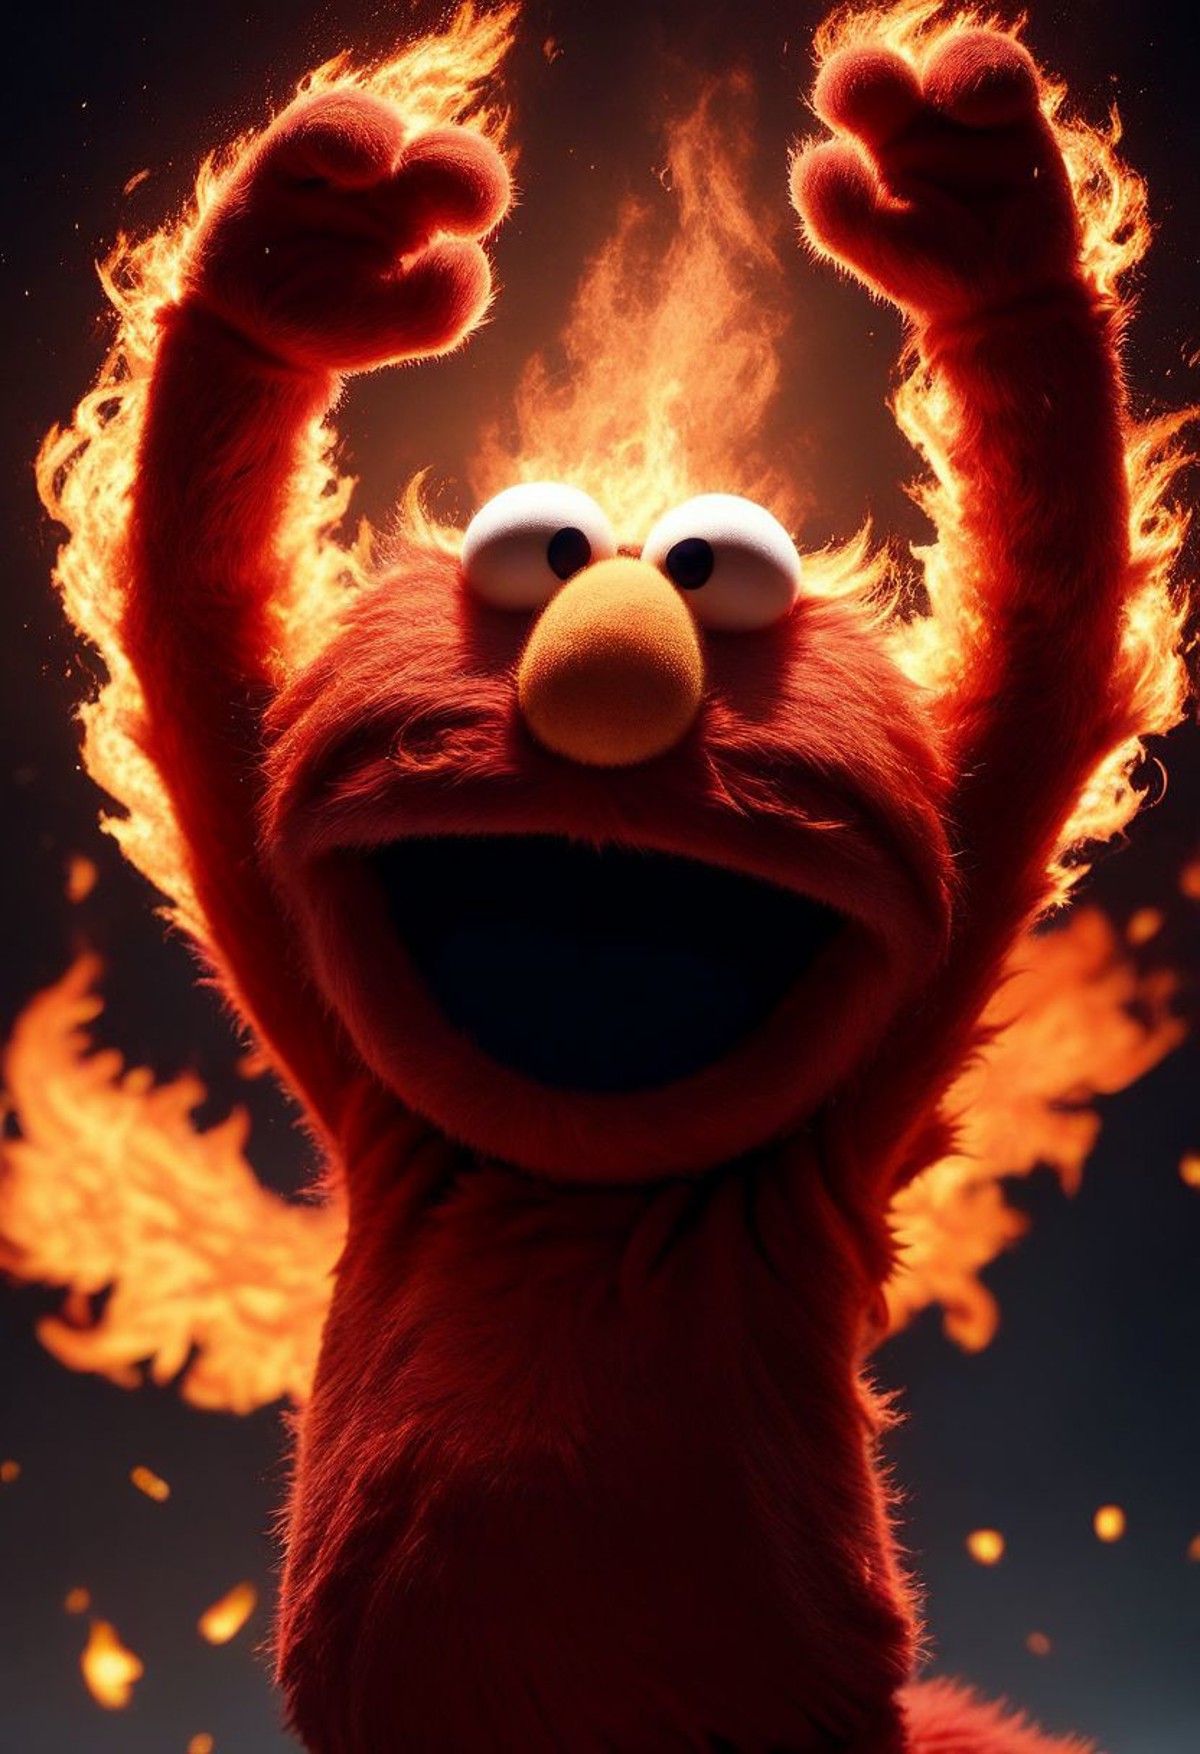 score_9, score_8_up, elmo, muppet, (cute), red fur, thin torso, demonic laugh, arms up, arms straight, looking upwards, up...